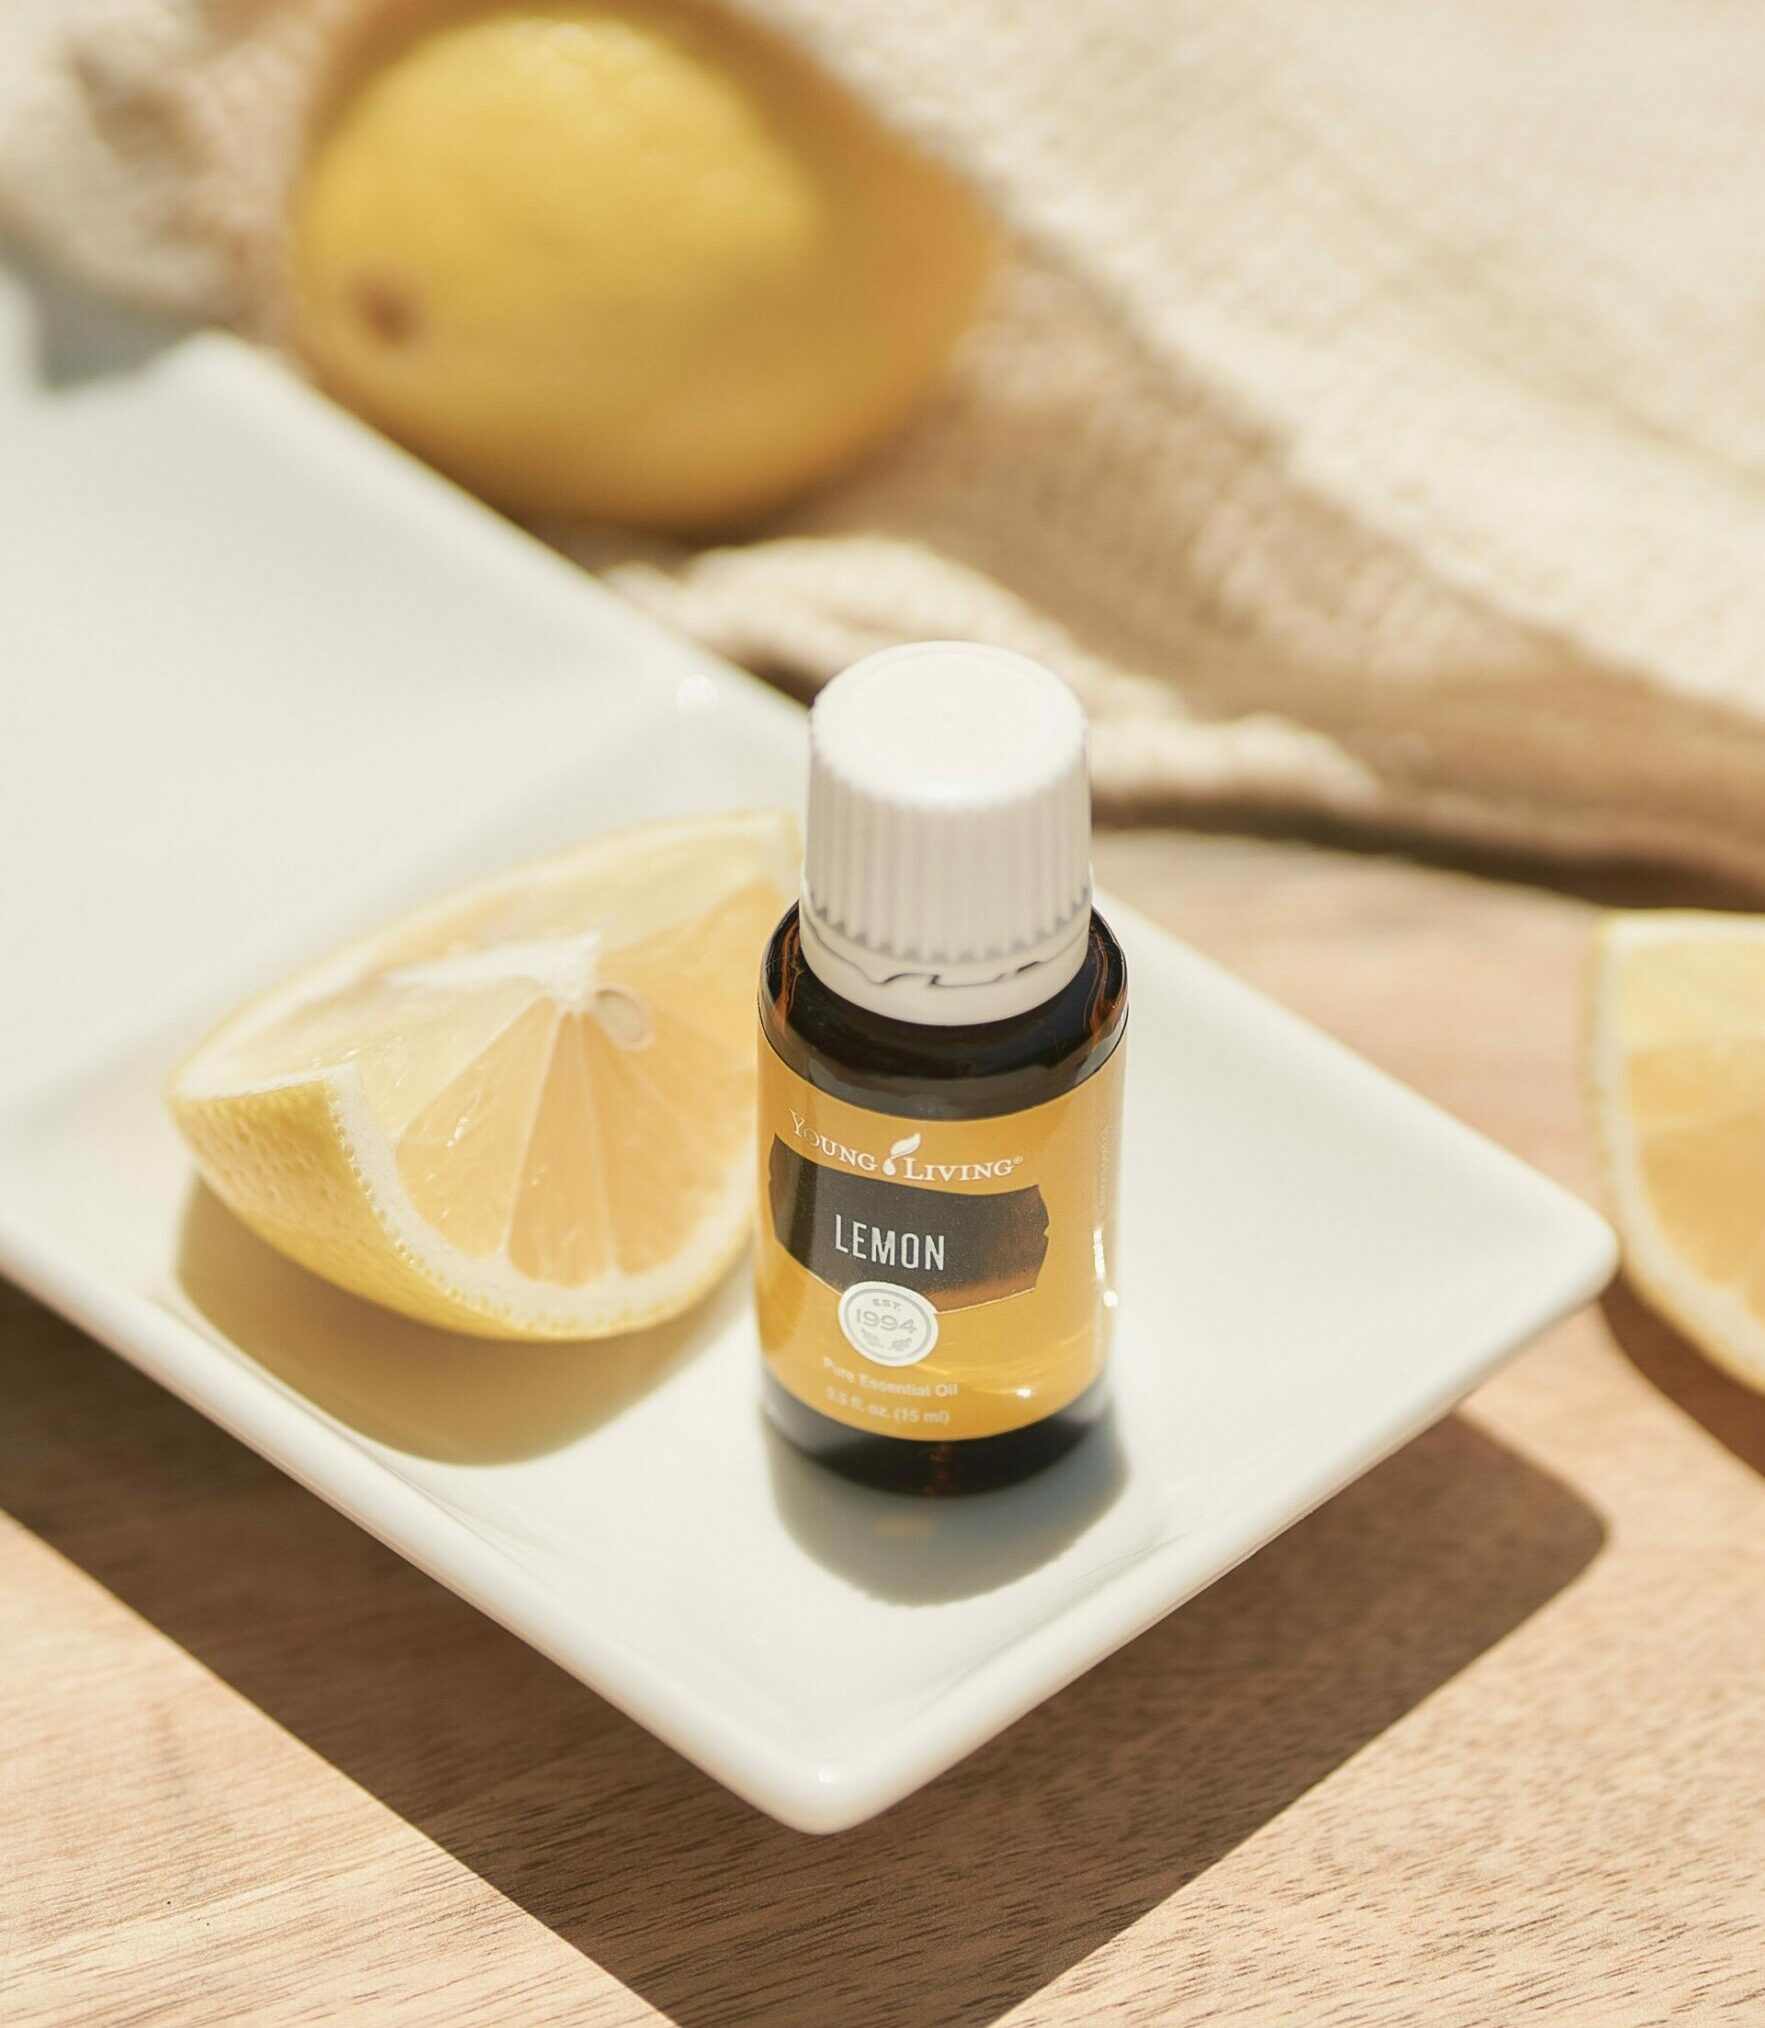 Lemon essential oil sitting on tray with lemon slices - Young Living Lavender Life blog